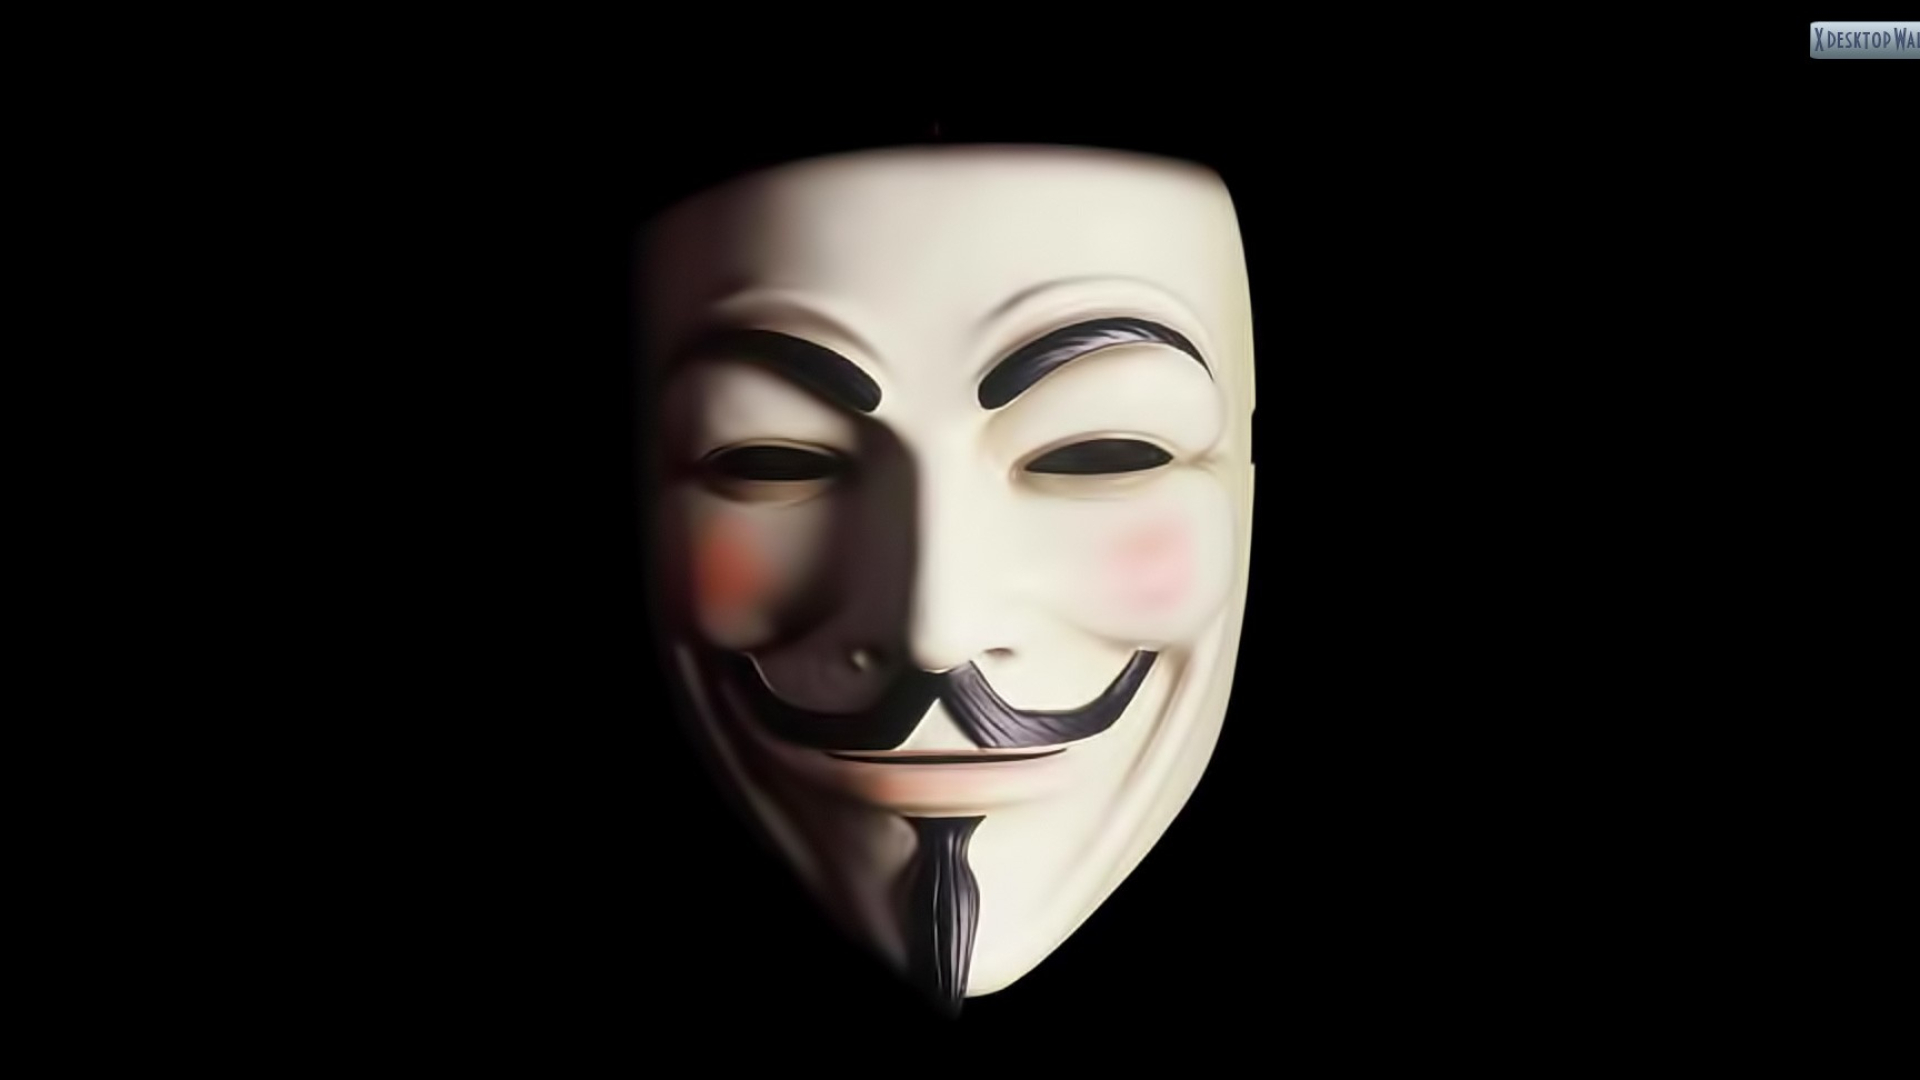 1920x1080 Guy Fawkes Mask On Black Background Wallpaper